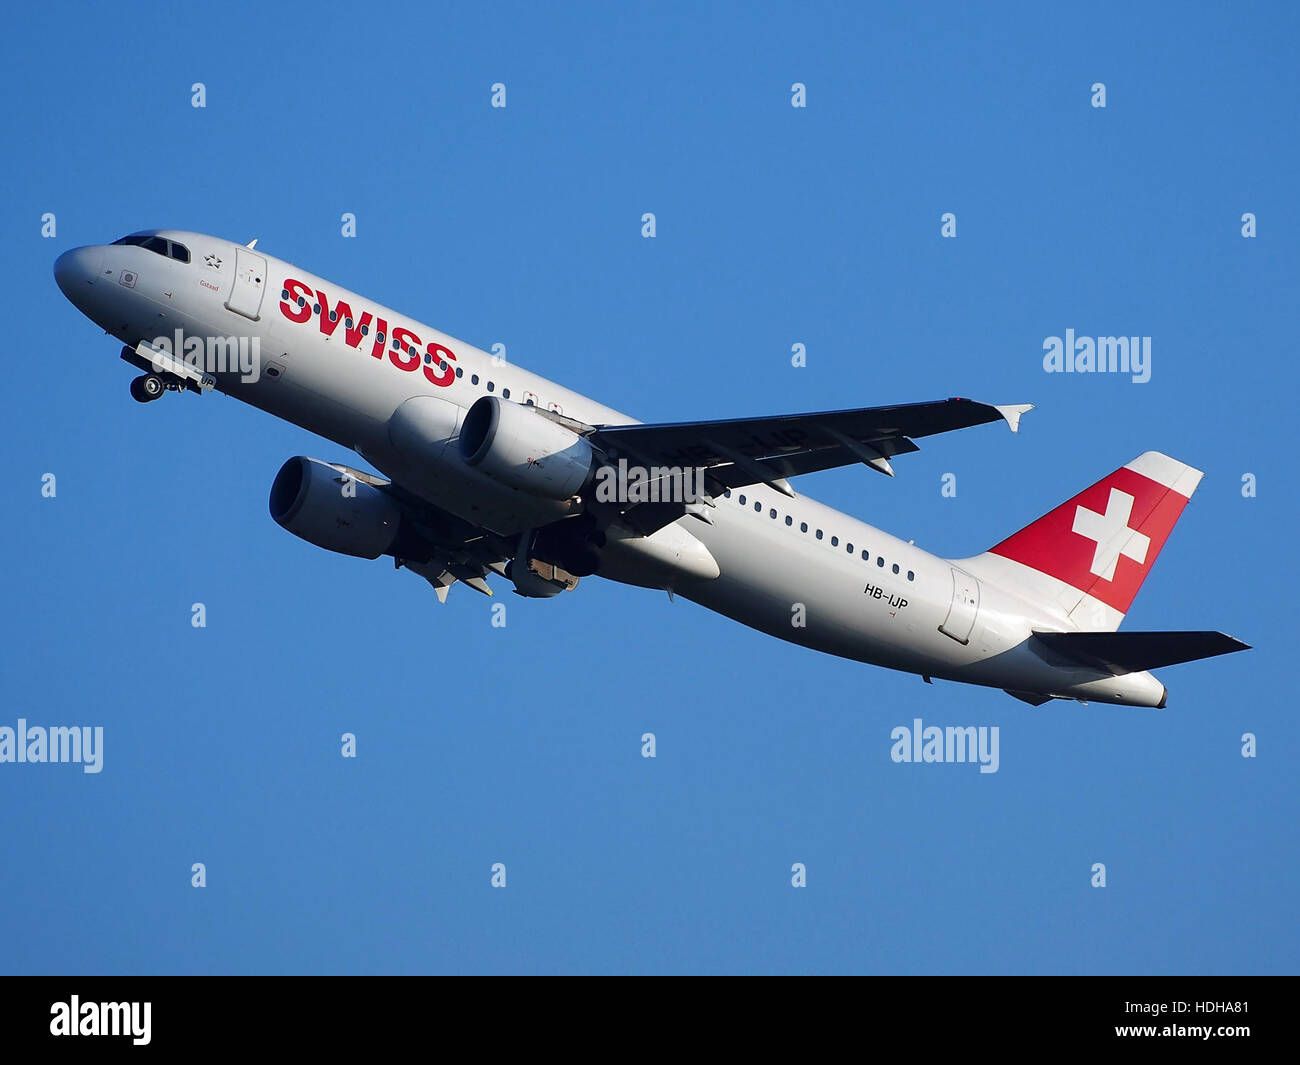 HB-IJP - Airbus A320-214 - Swiss takeoff from Schiphol runway 36C pic1 Stock Photo